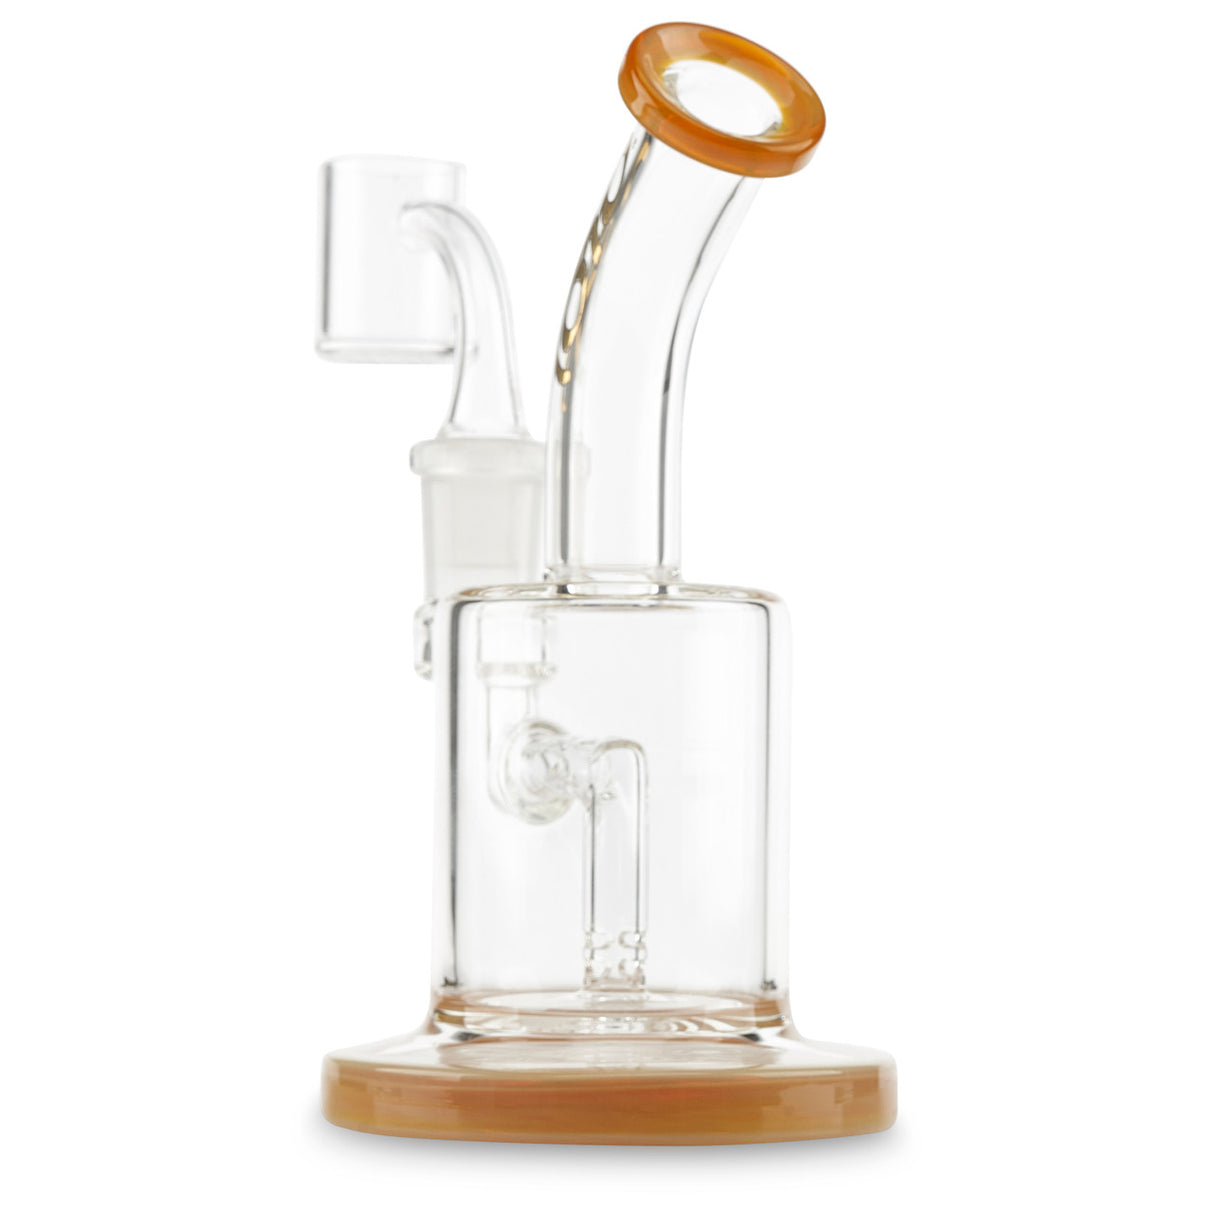 toro glass mac xl caramel 14mm jointed rig for concentrates and dabs